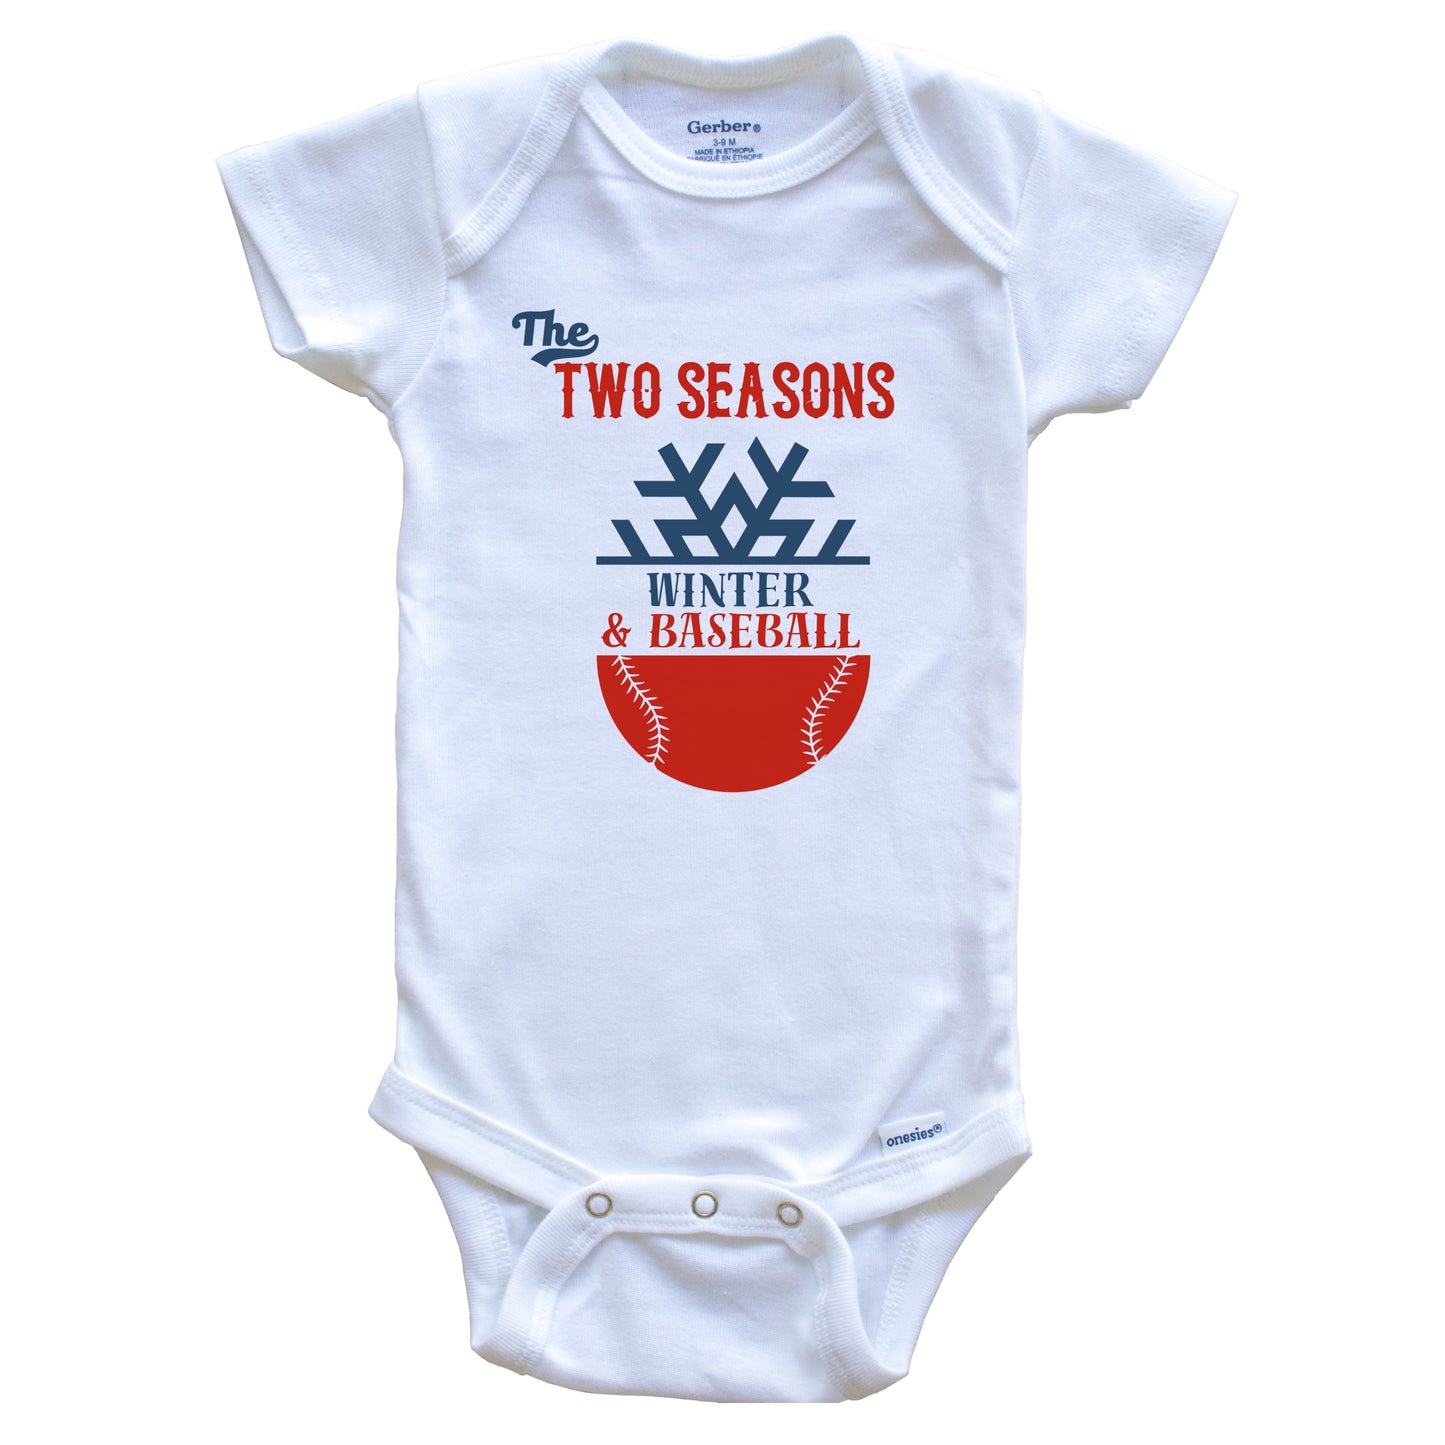 Toronto Maple Leafs Baby Apparel, Baby Maple Leafs Clothing, Merchandise